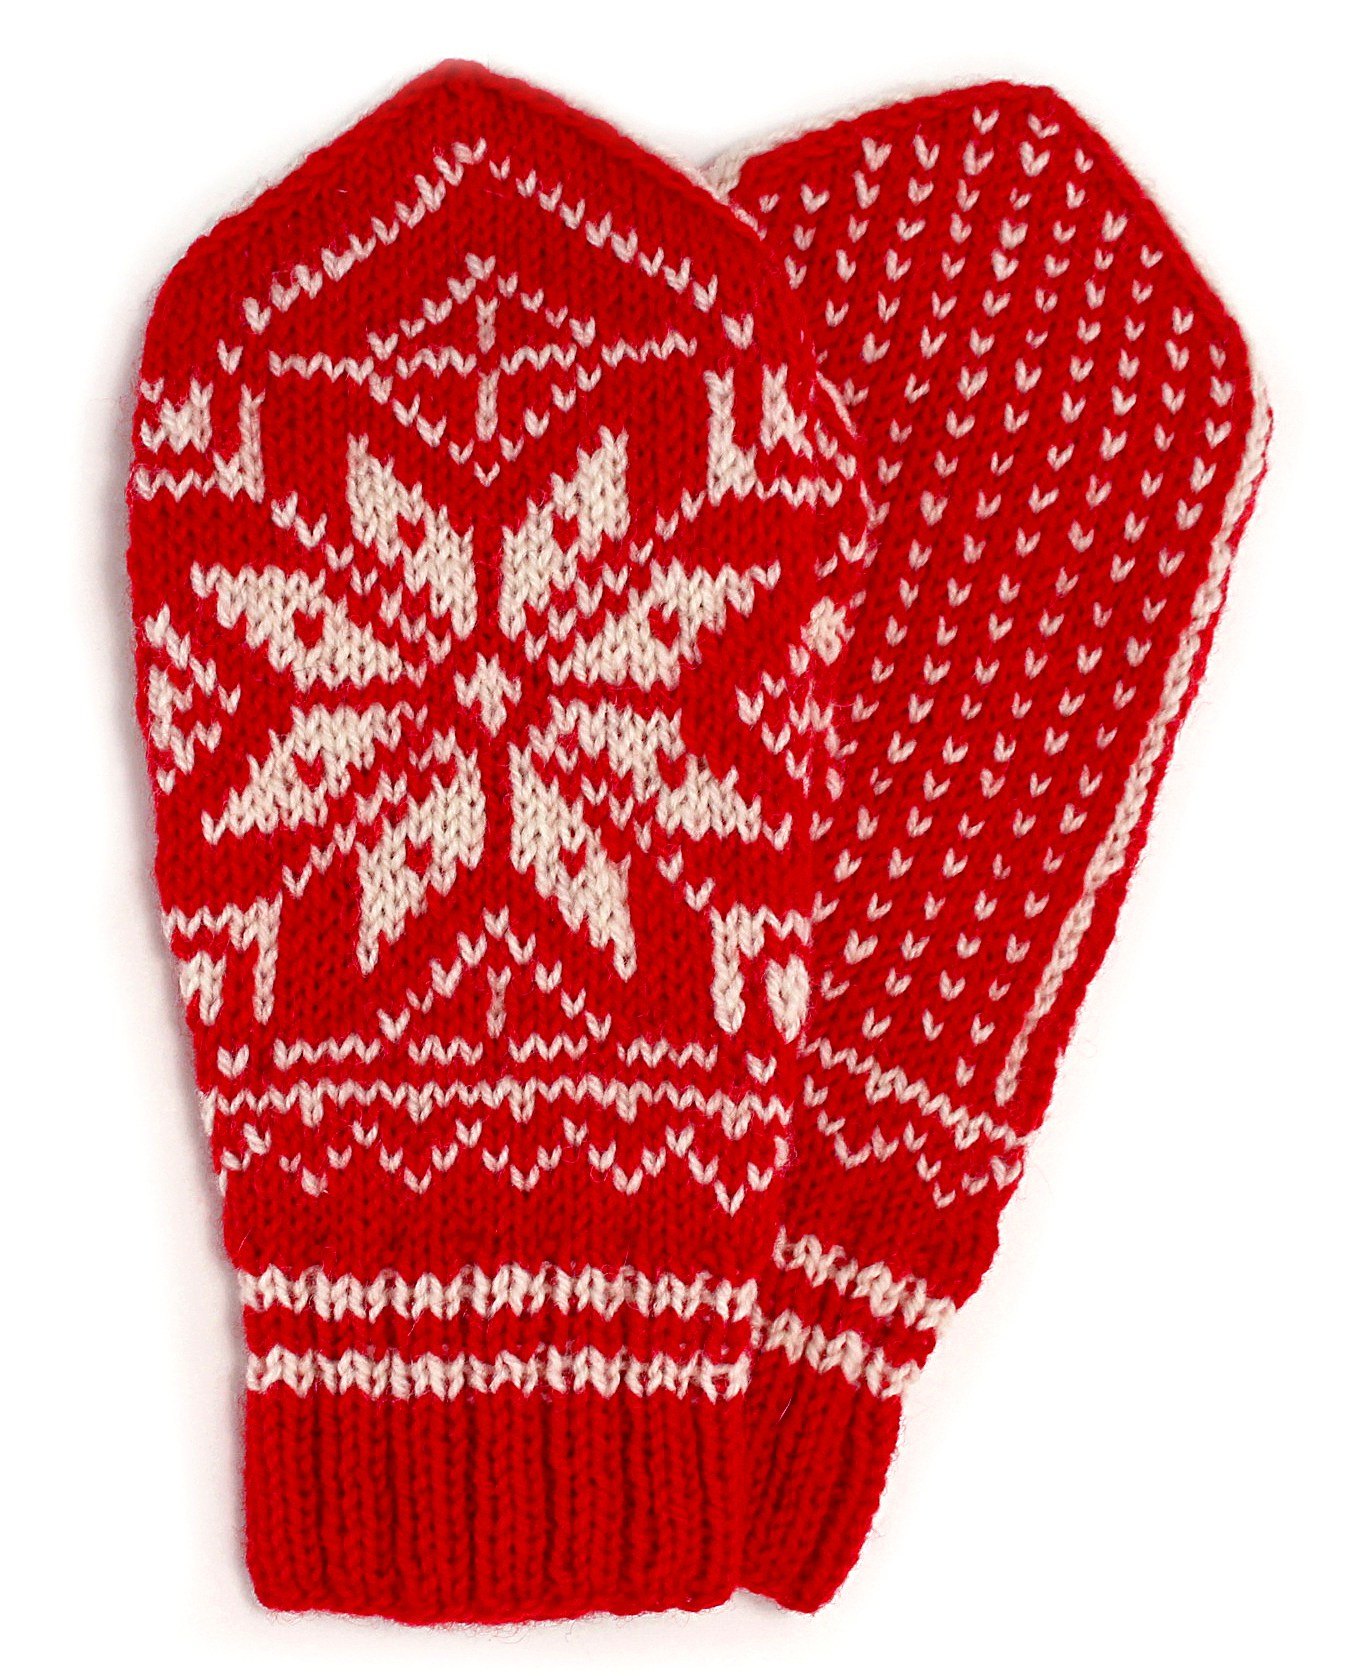 Uncle Arne's Selbu Rose Mittens by Kate Running